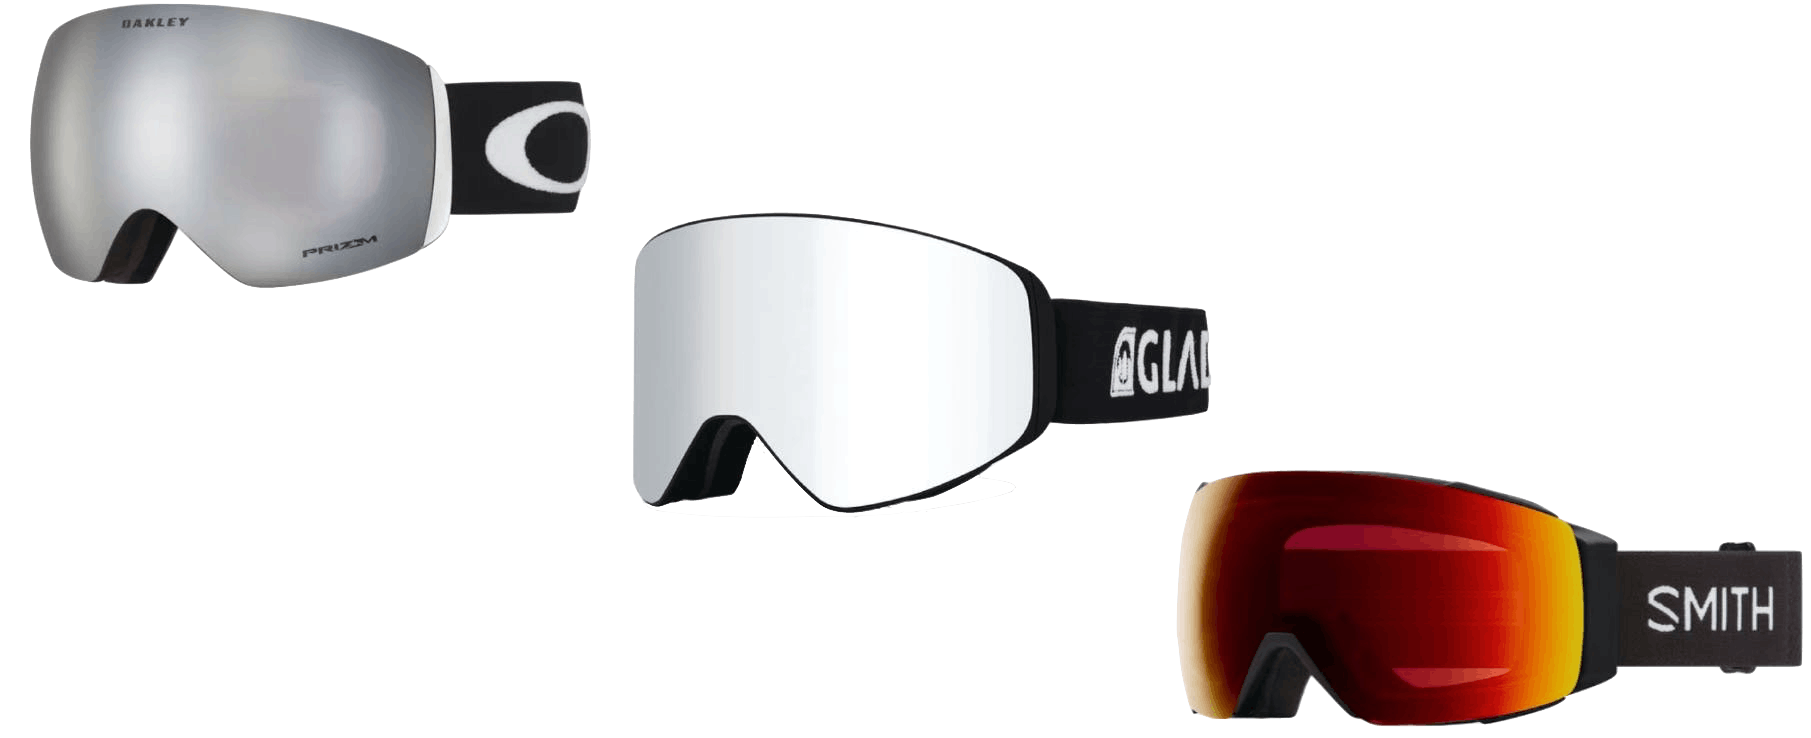 Three goggles. From left to right: the Oakley Flight Deck Ski Goggles, the Glade Optics MagFlight Goggles, and the Smith I/O Mag Goggles.